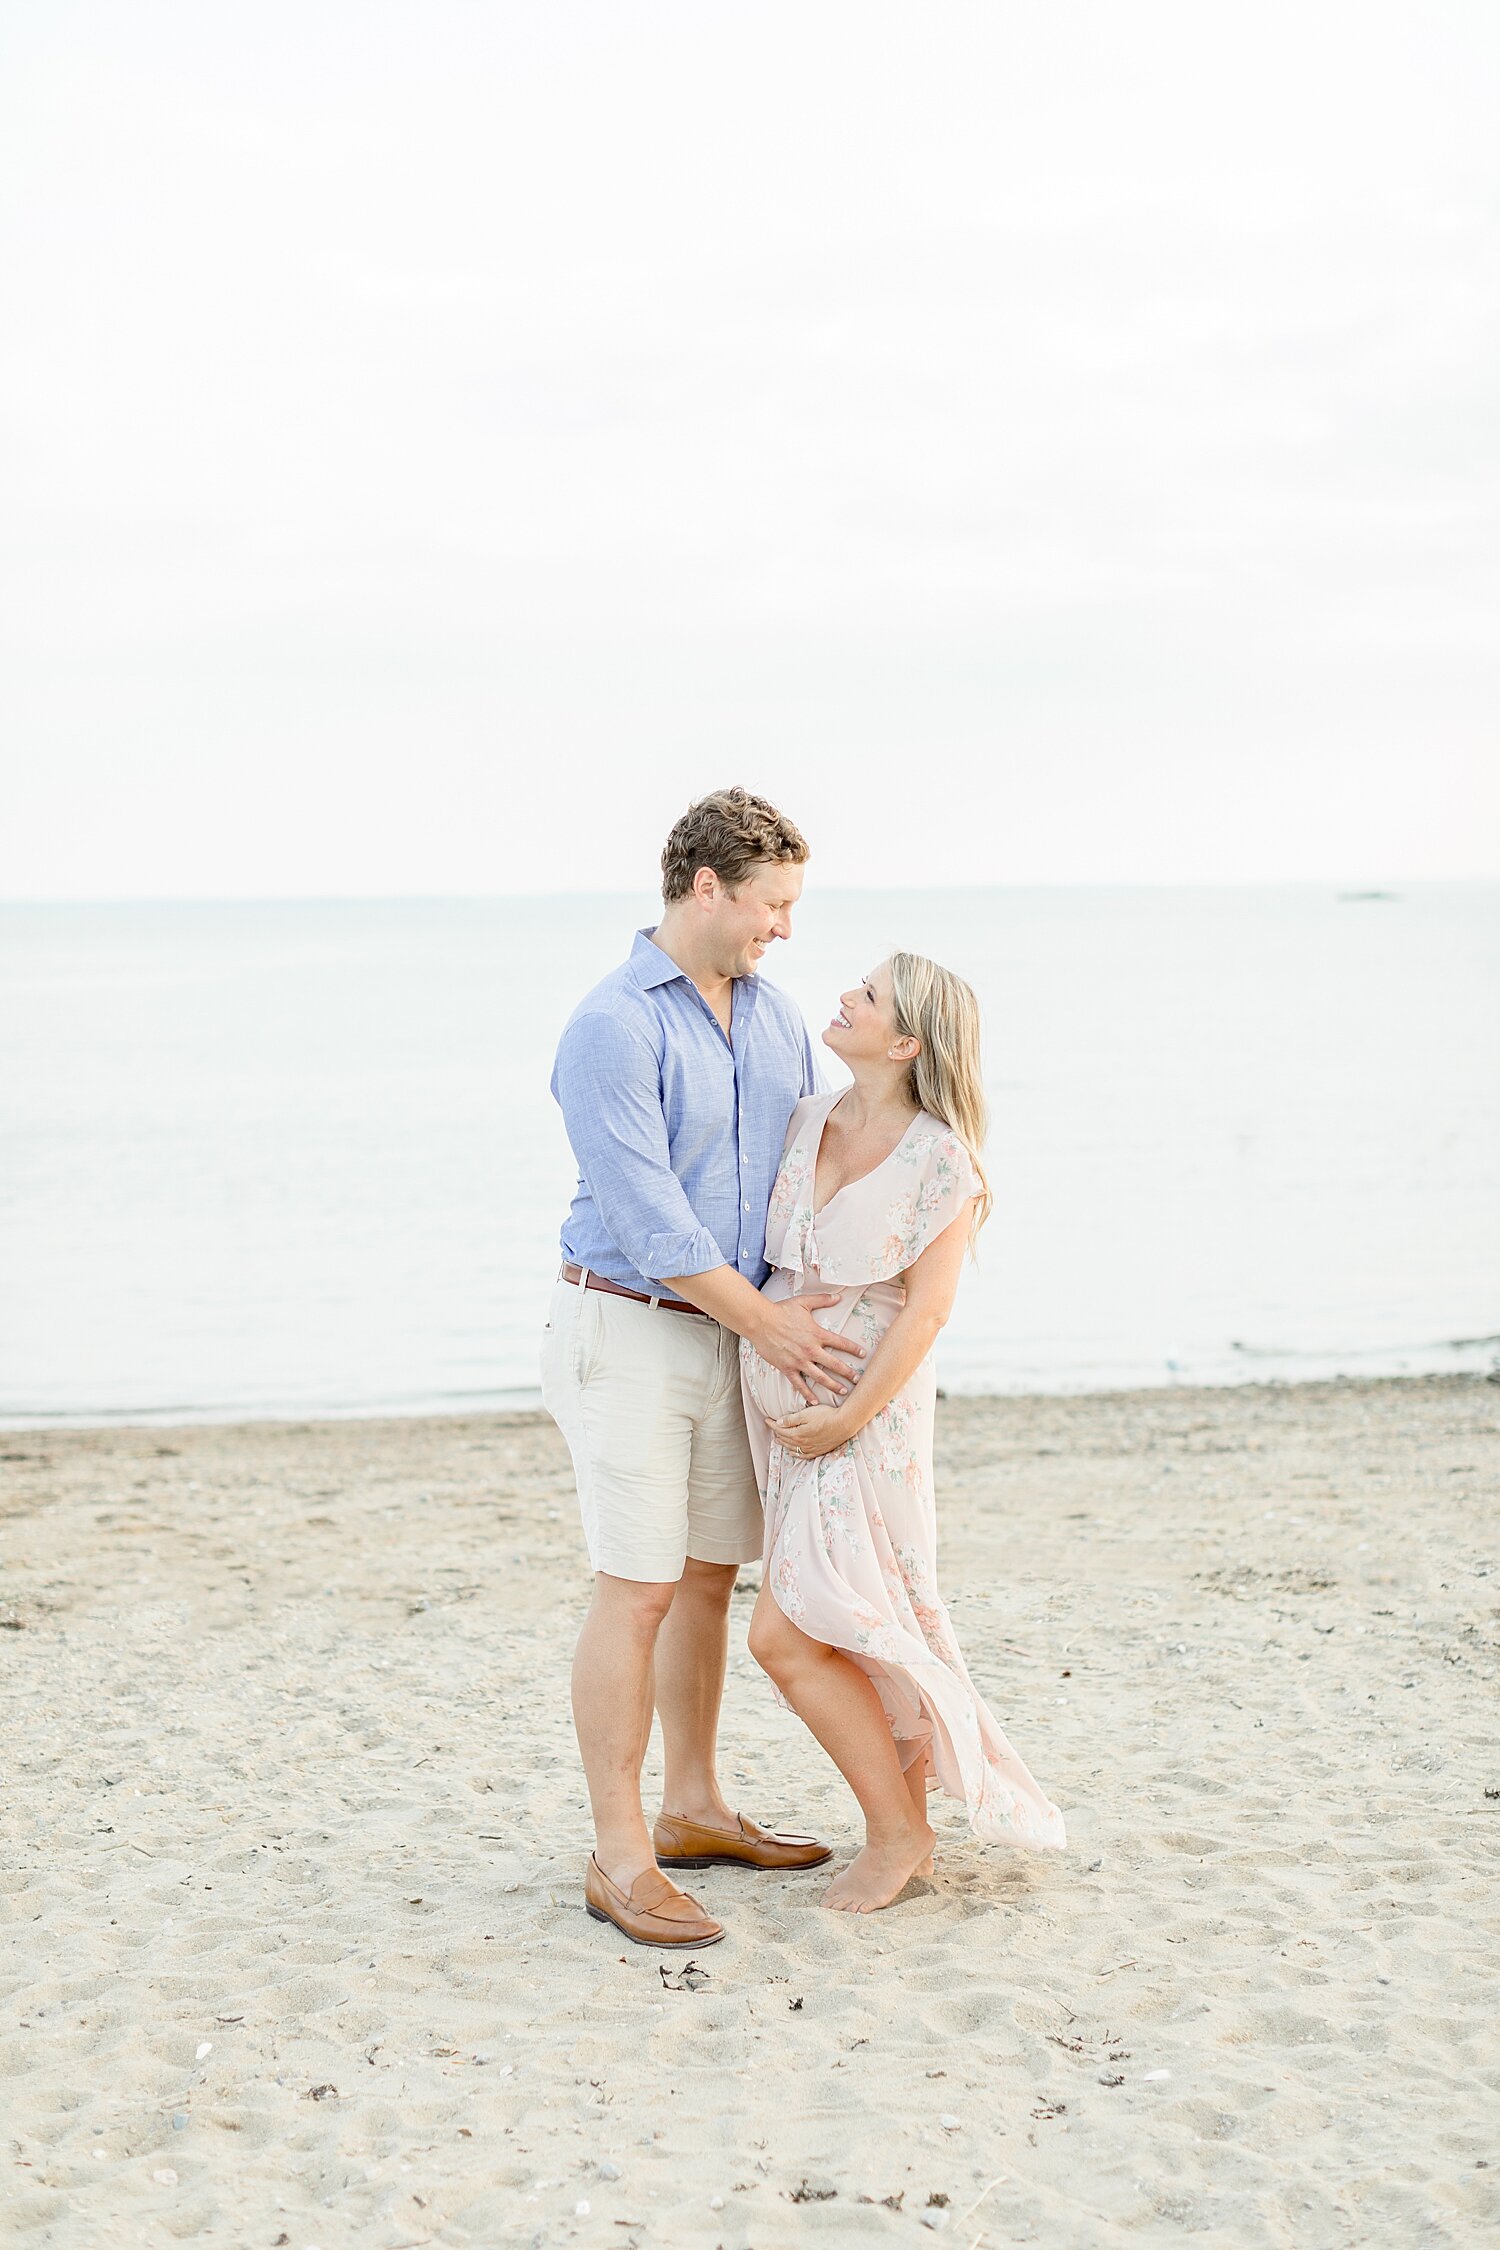 Weed Beach Maternity Session | Darien, CT Maternity Photographer | Kristin Wood Photography